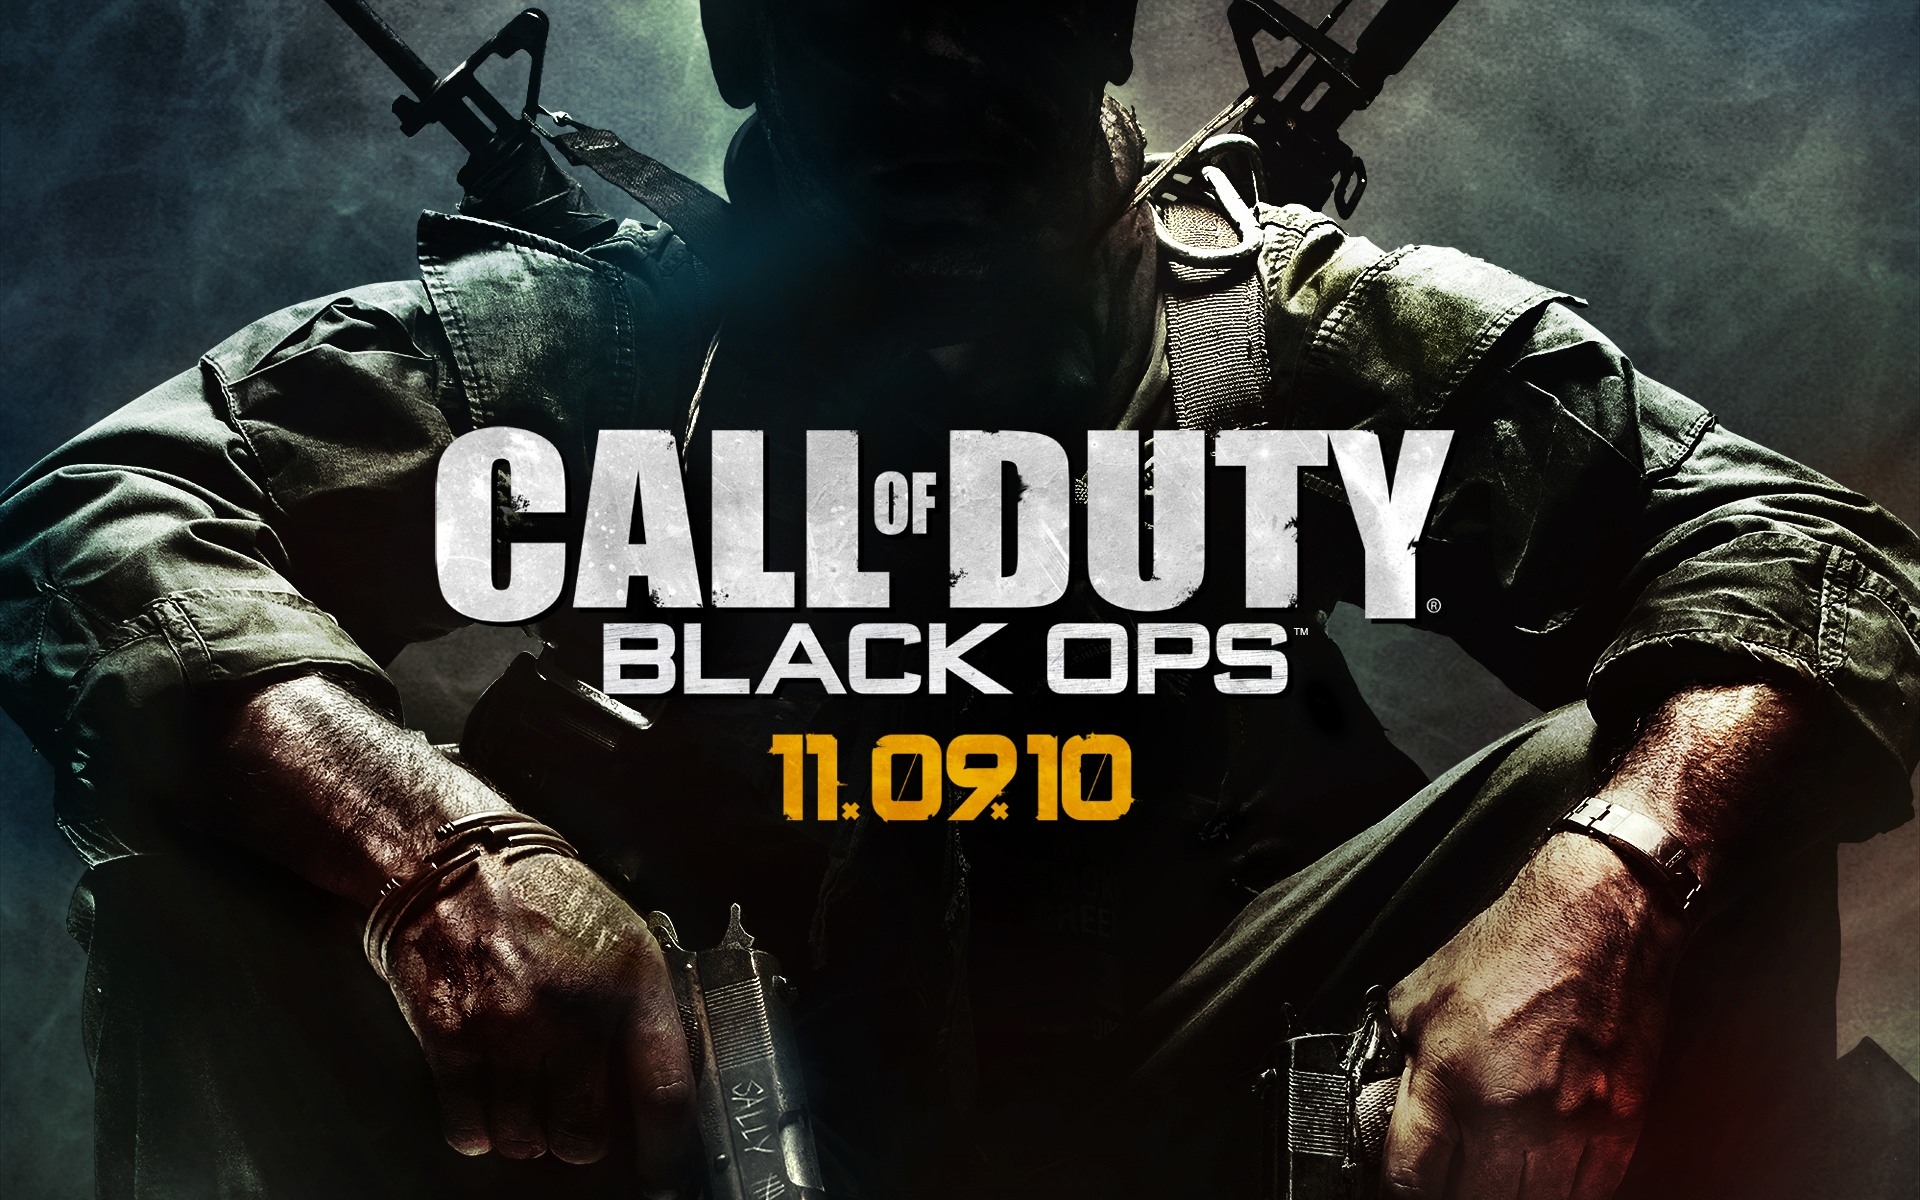  of Duty Black OPS wallpapers Call of Duty Black OPS stock photos